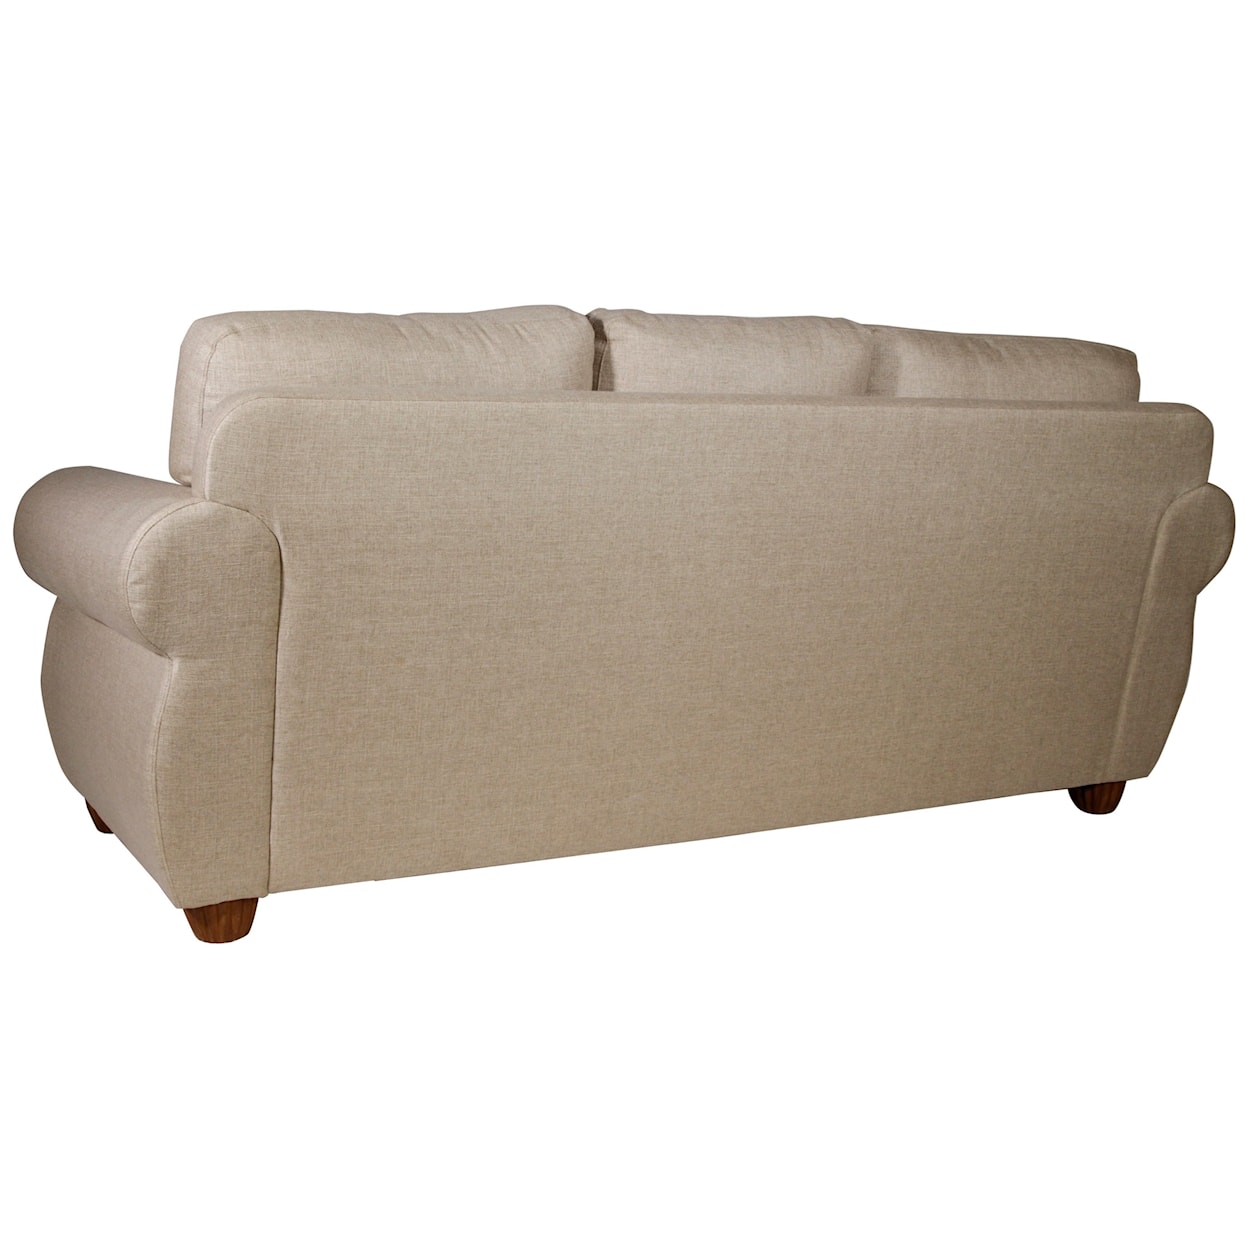 Synergy Home Furnishings 1374 Sofa with Woven Rattan Detail